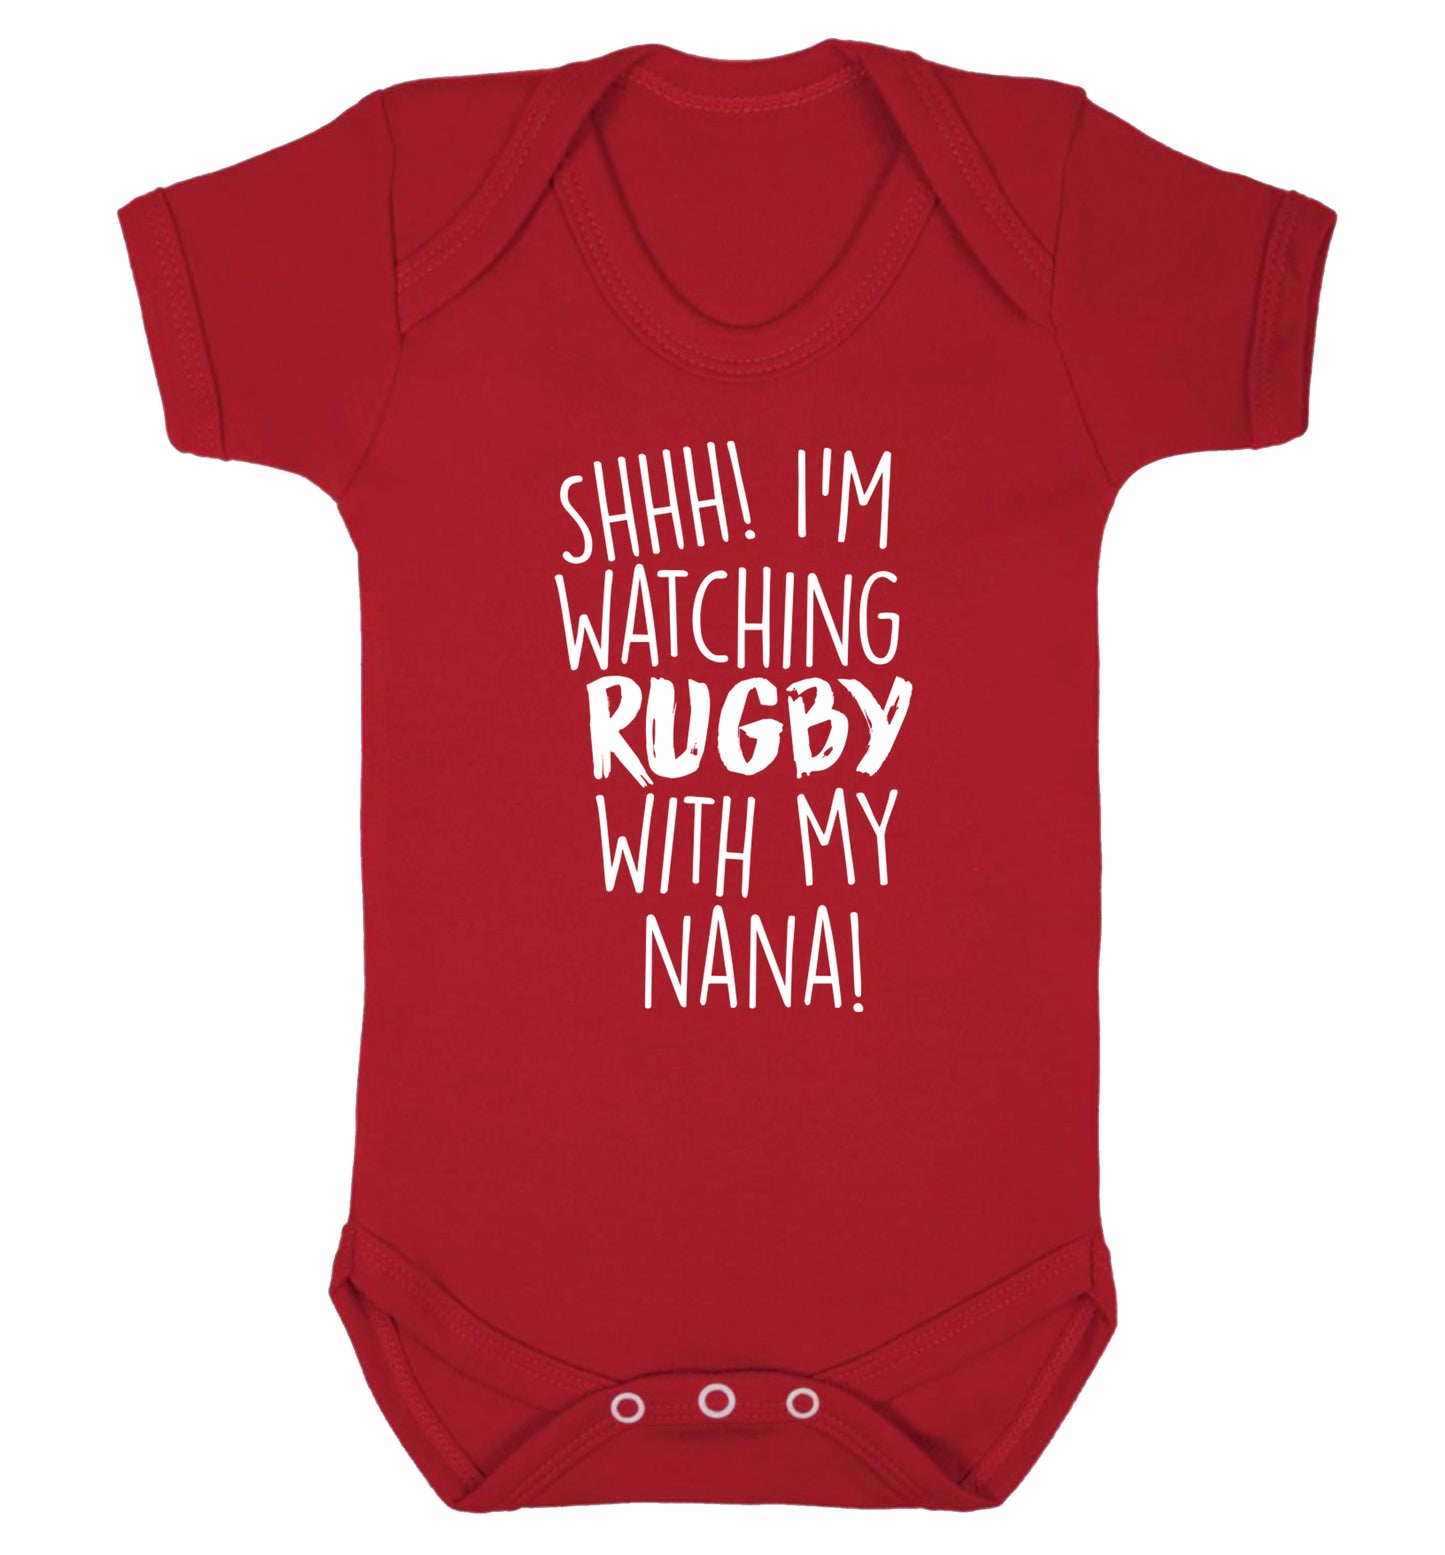 Shh I'm watching rugby with my nana Baby Vest red 18-24 months